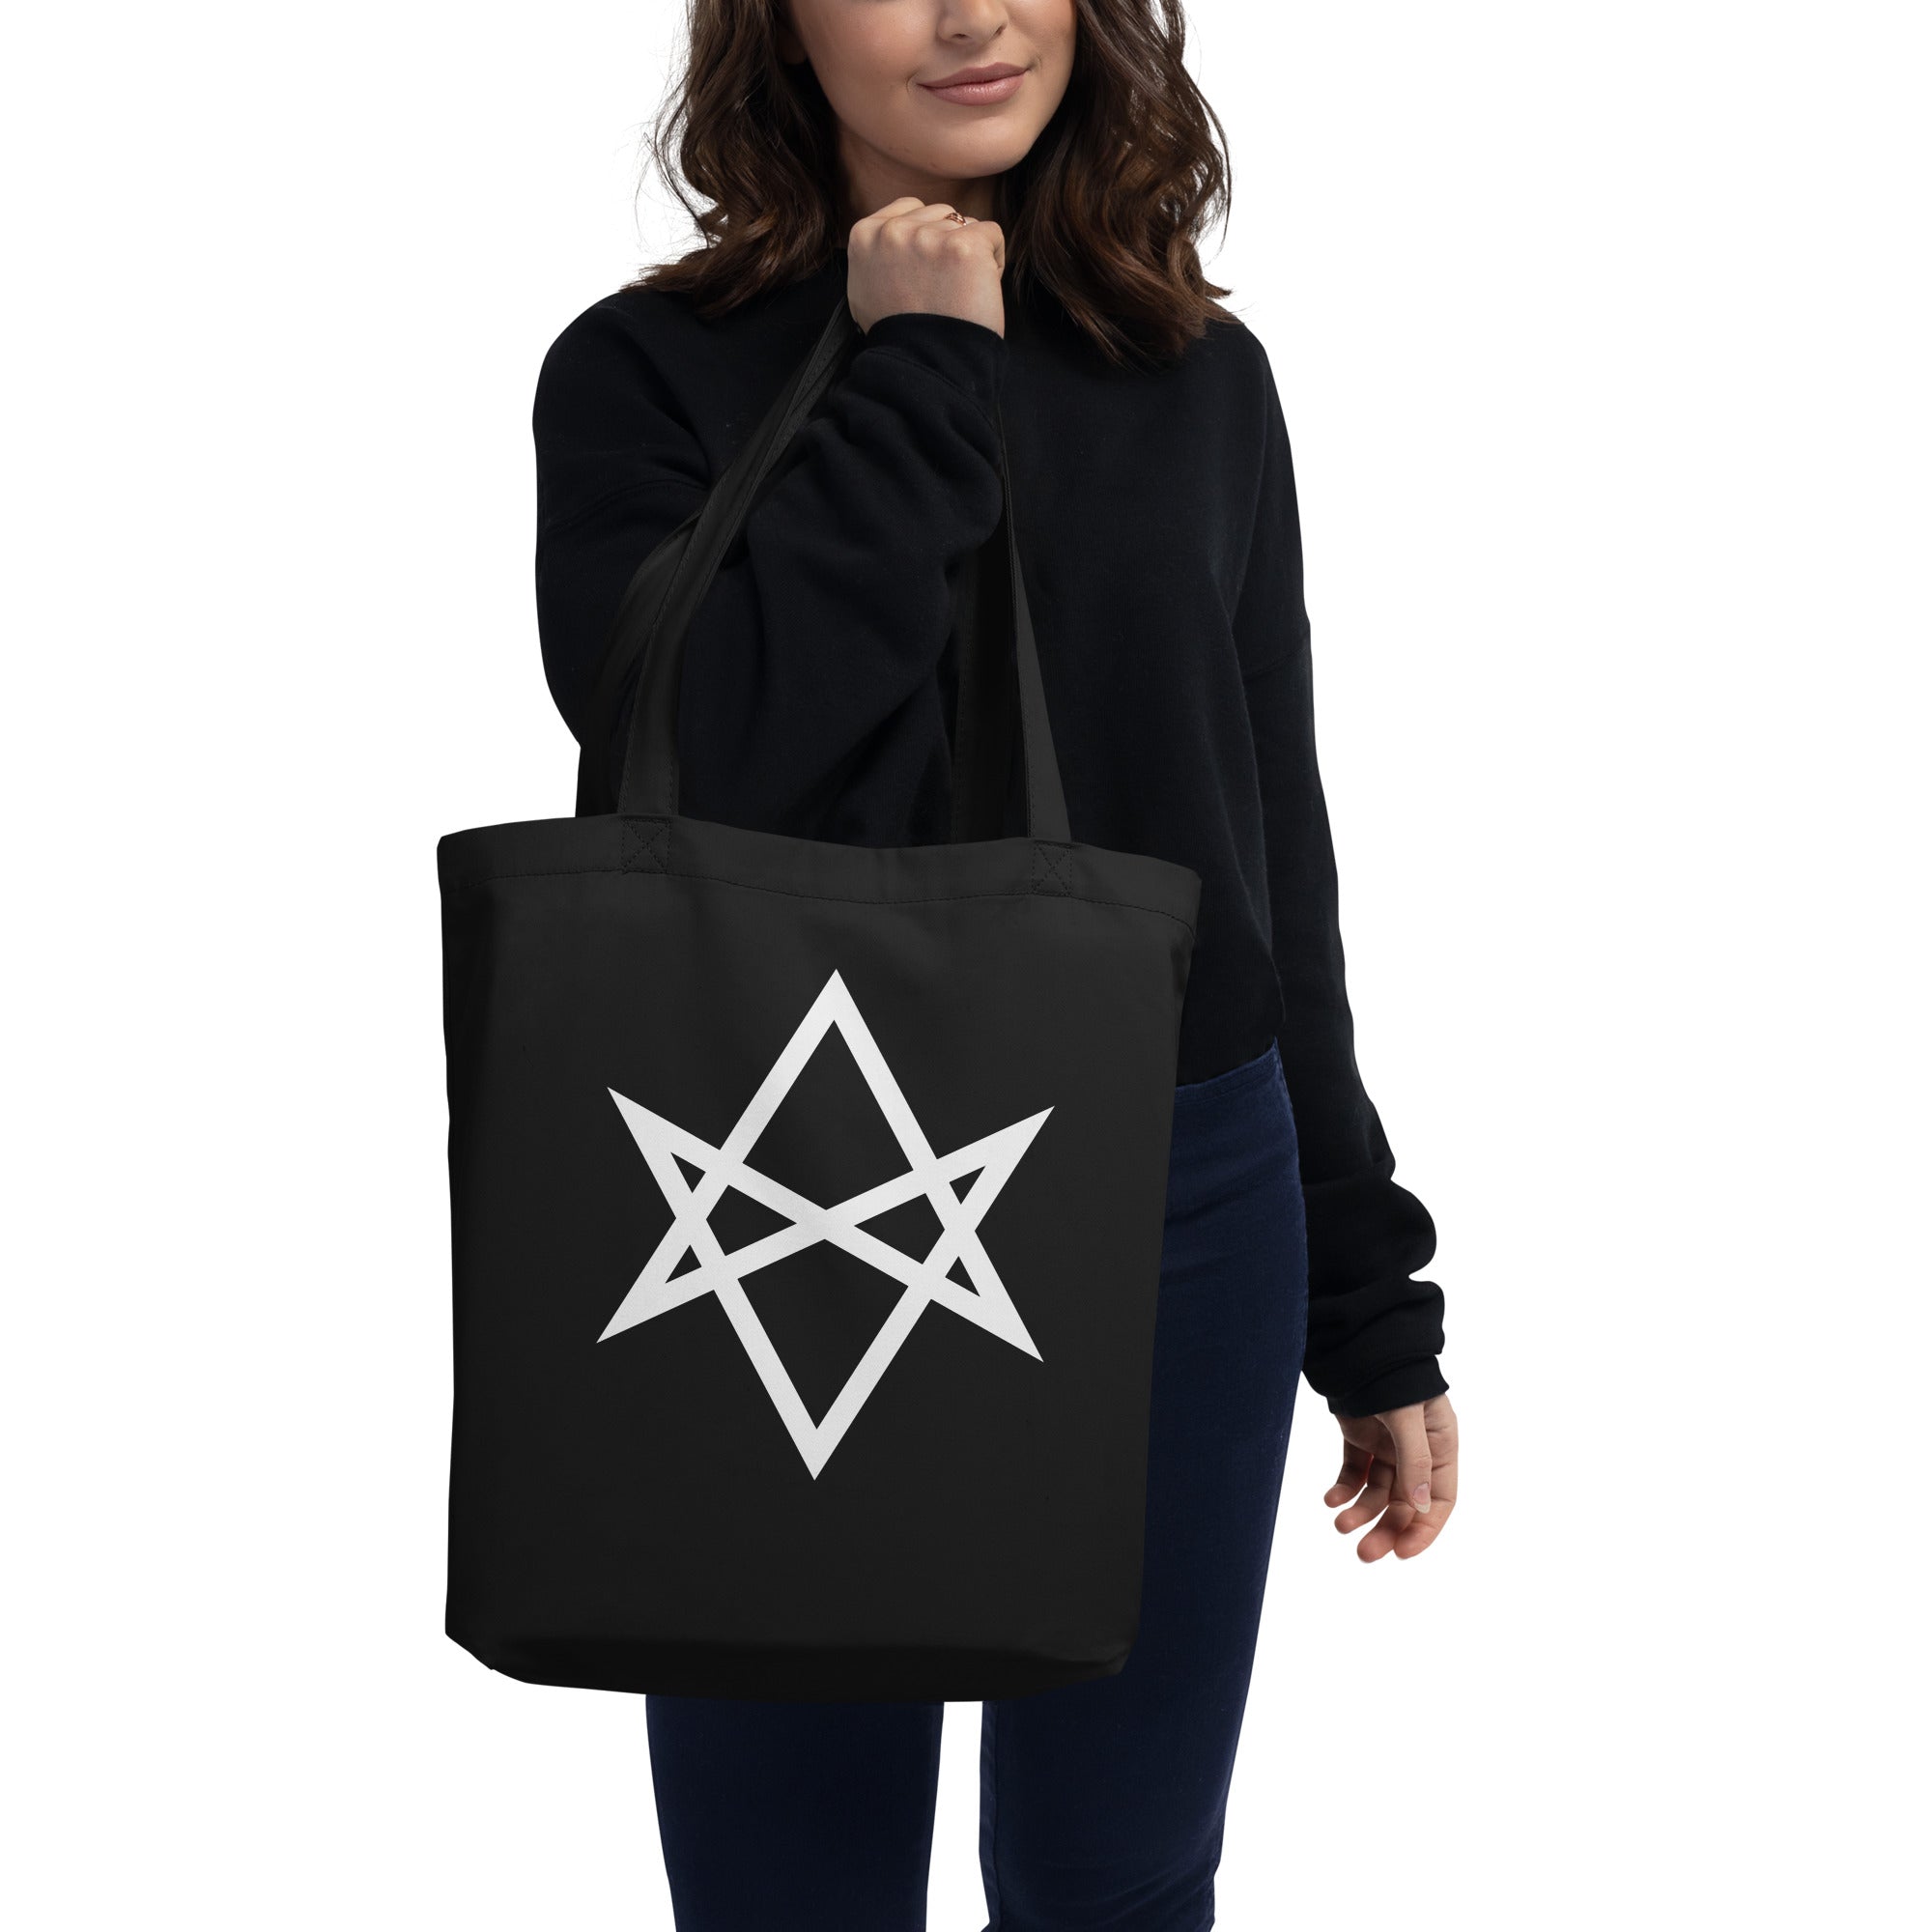 Unicursal Hexagram Six Pointed Star Occult Symbol Eco Tote Bag - Edge of Life Designs